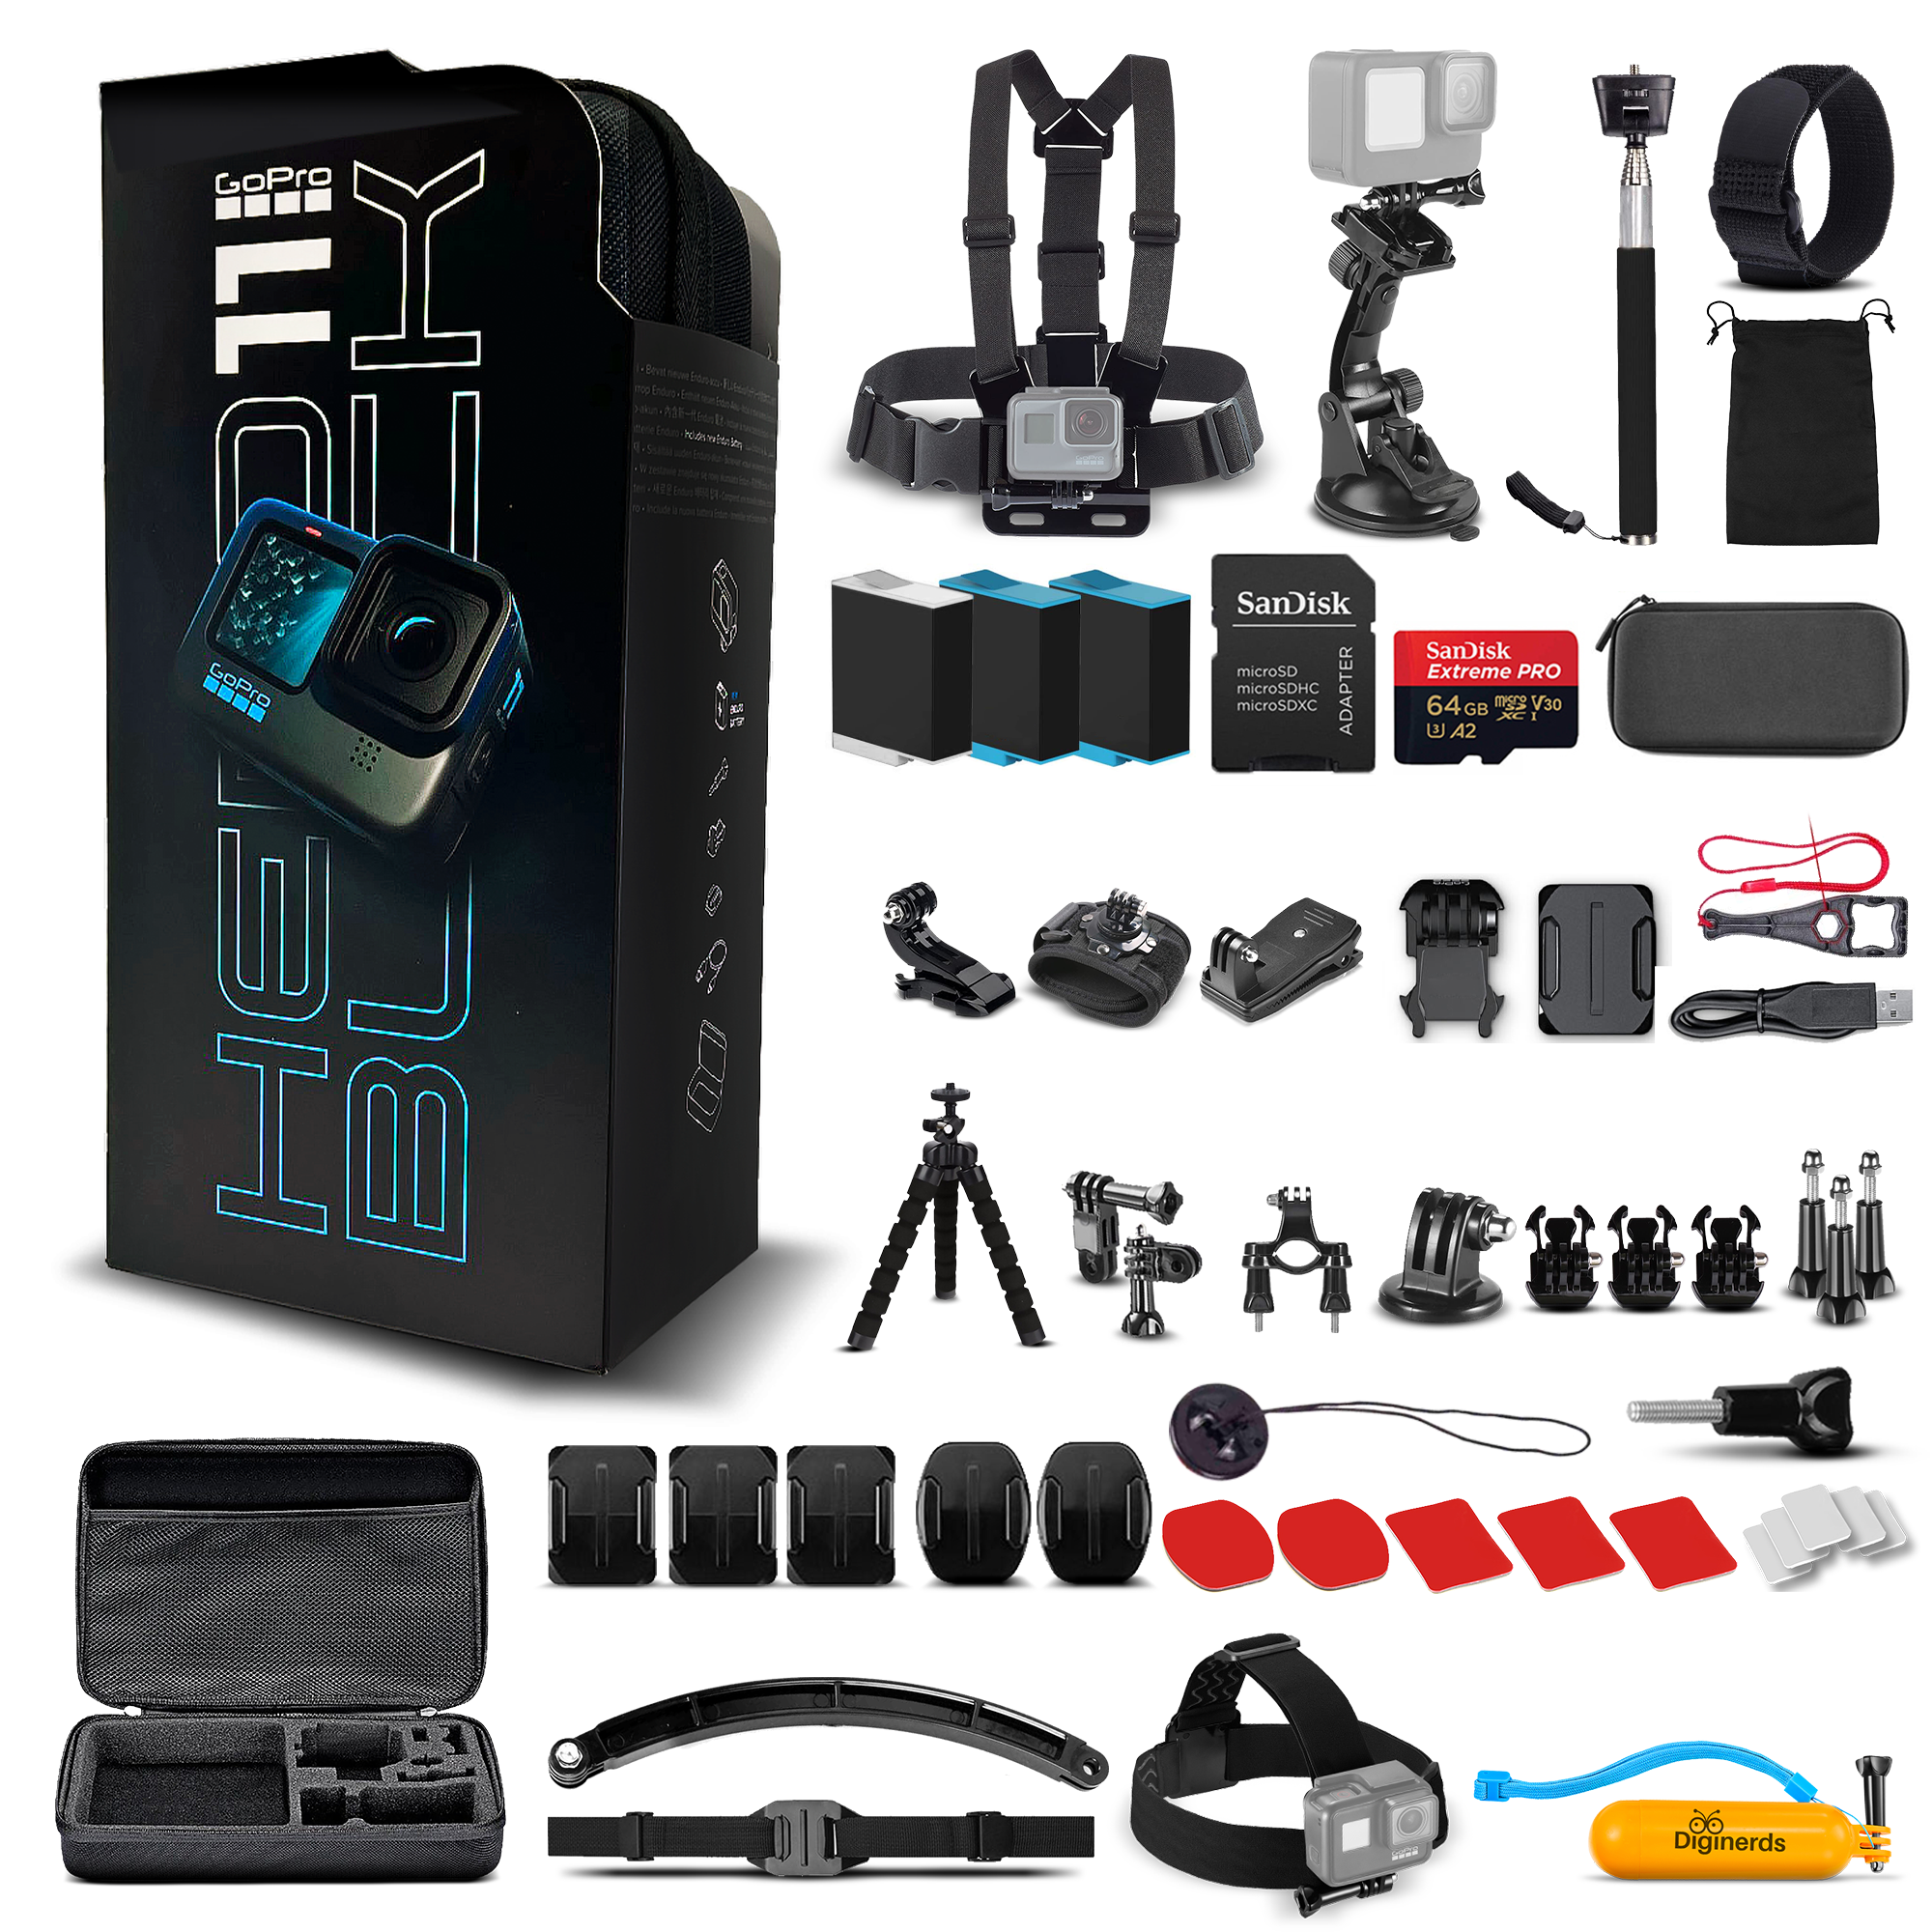 GoPro HERO11 - Action Camera + 64GB Card, 50 Piece Accessory Kit